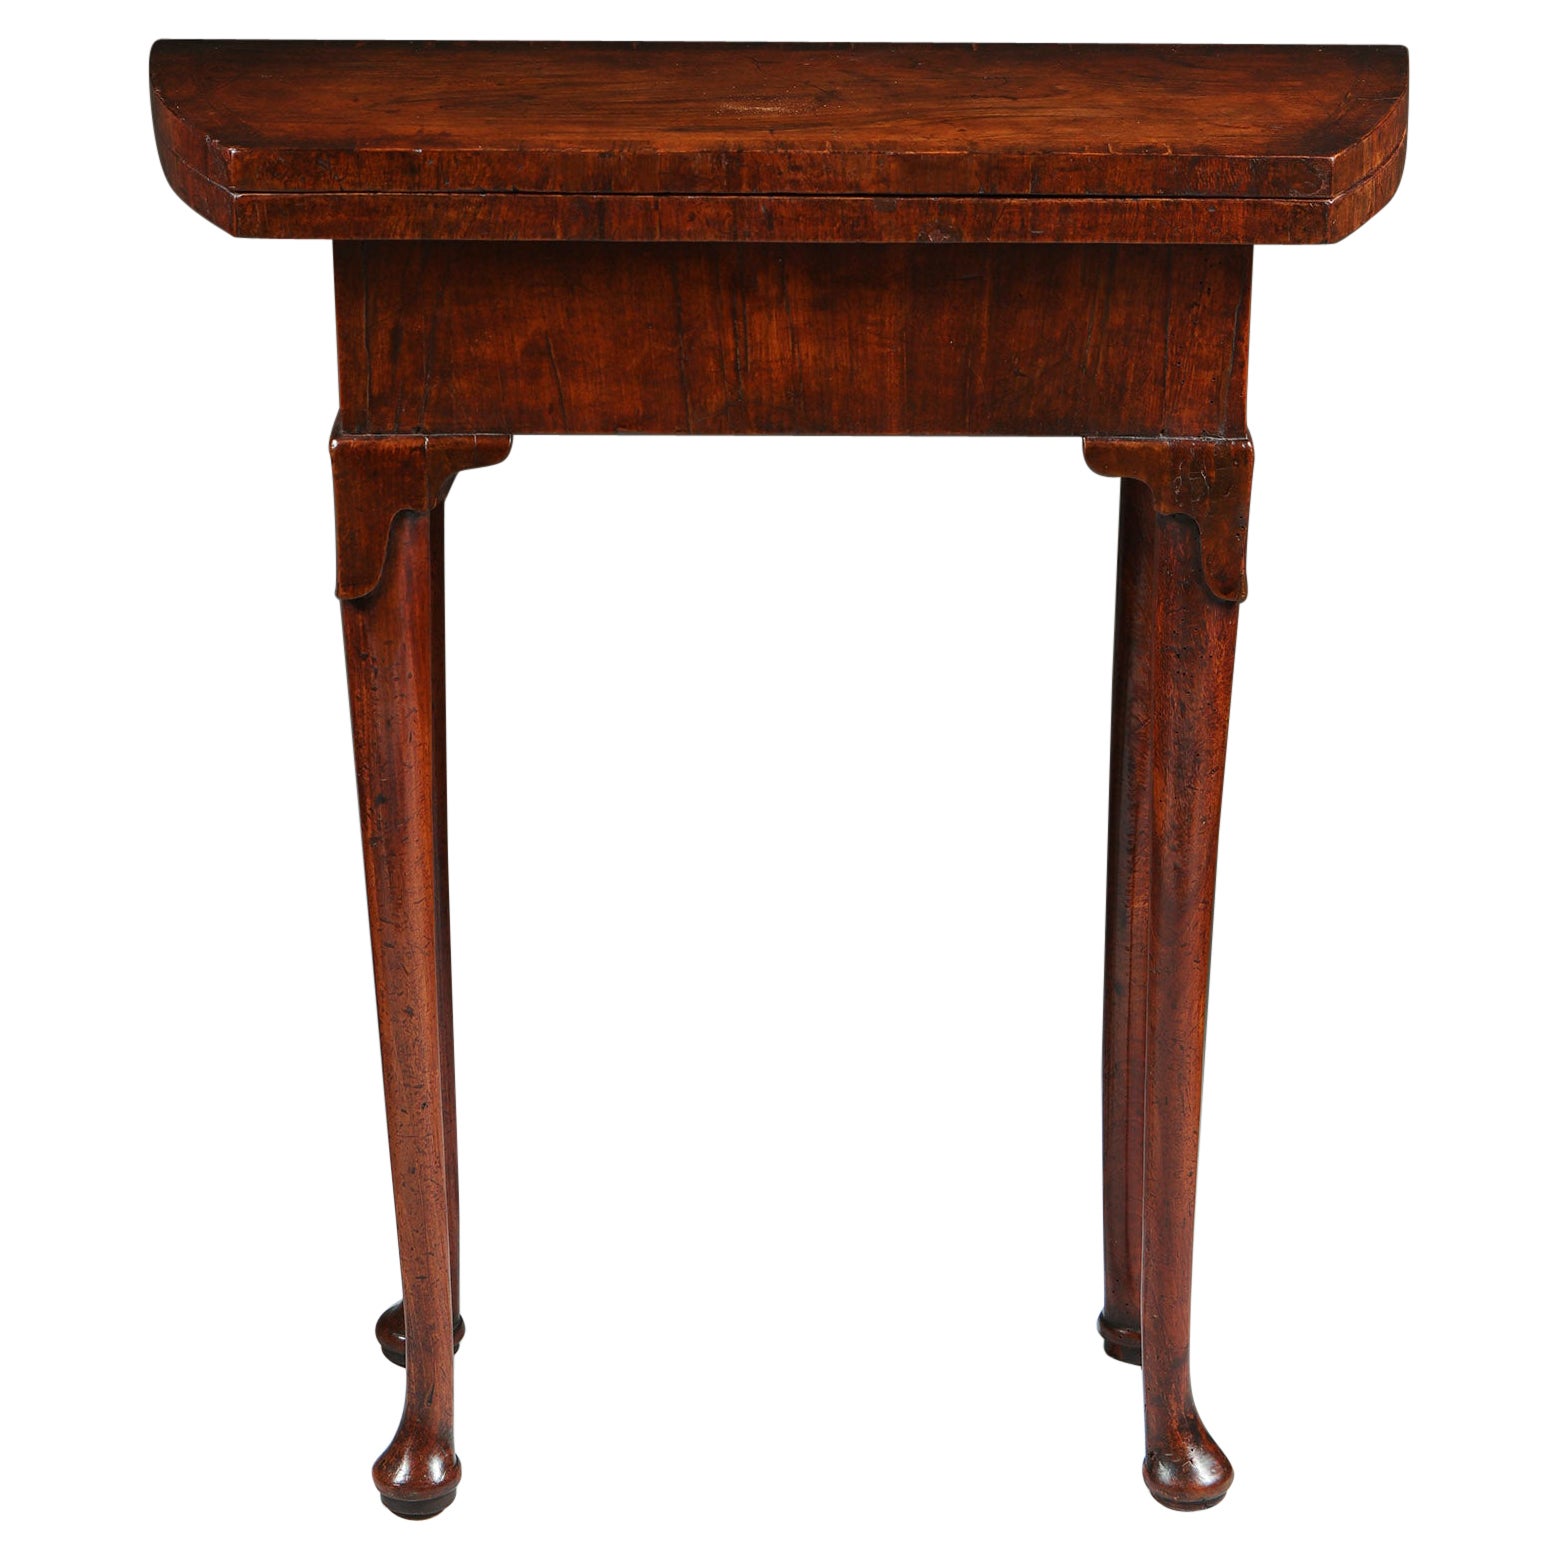 A Unique Early 18th Century Diminutive George I Figured Walnut Bachelors Table For Sale